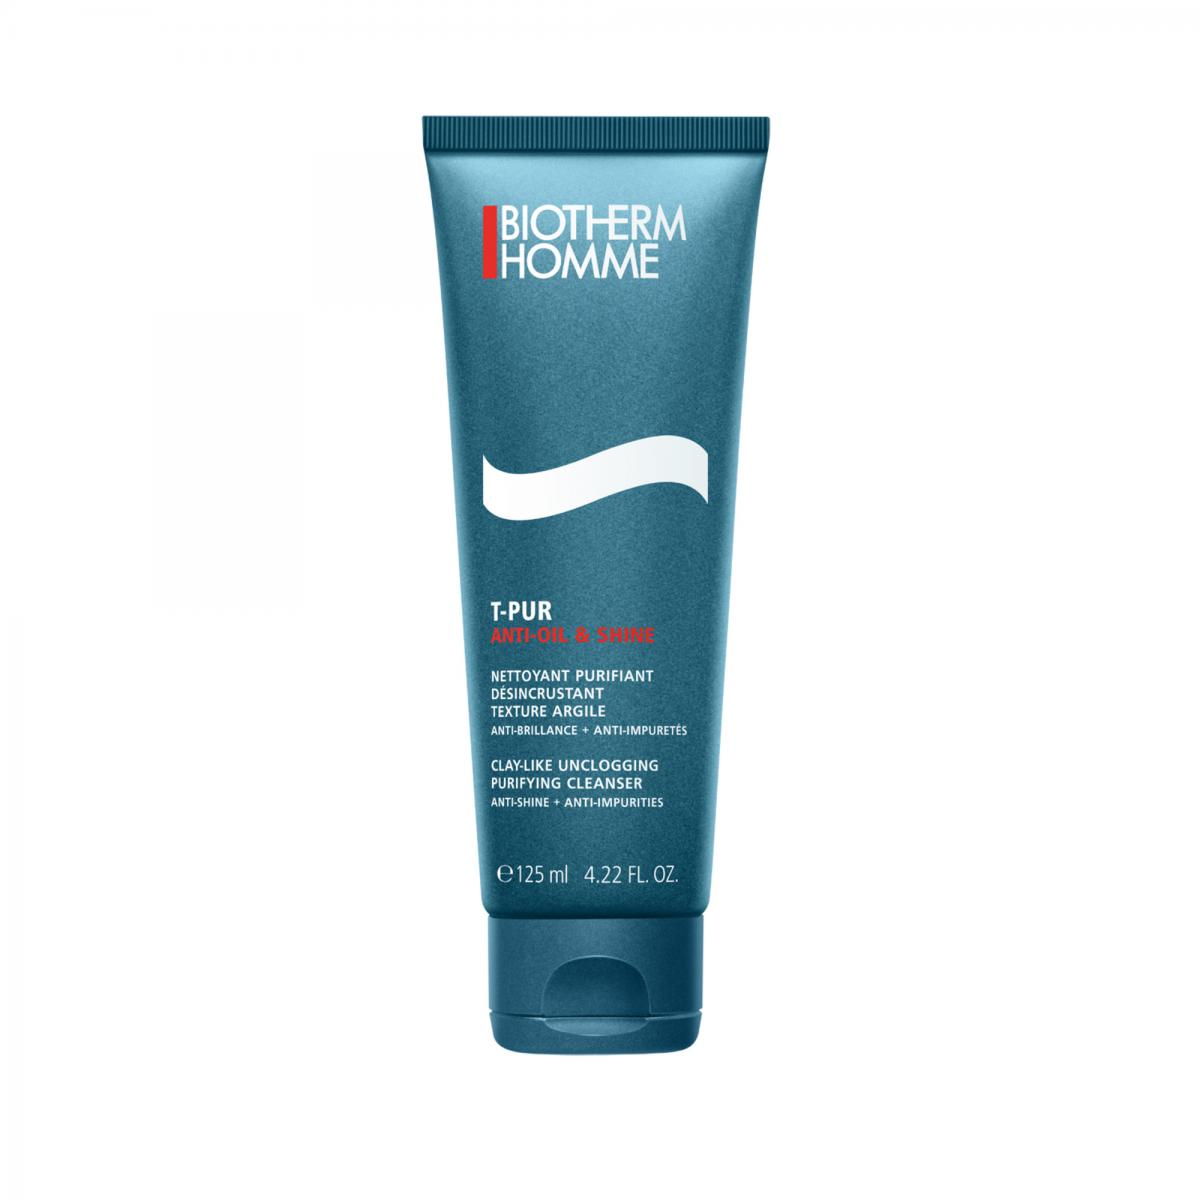 Biotherm homme